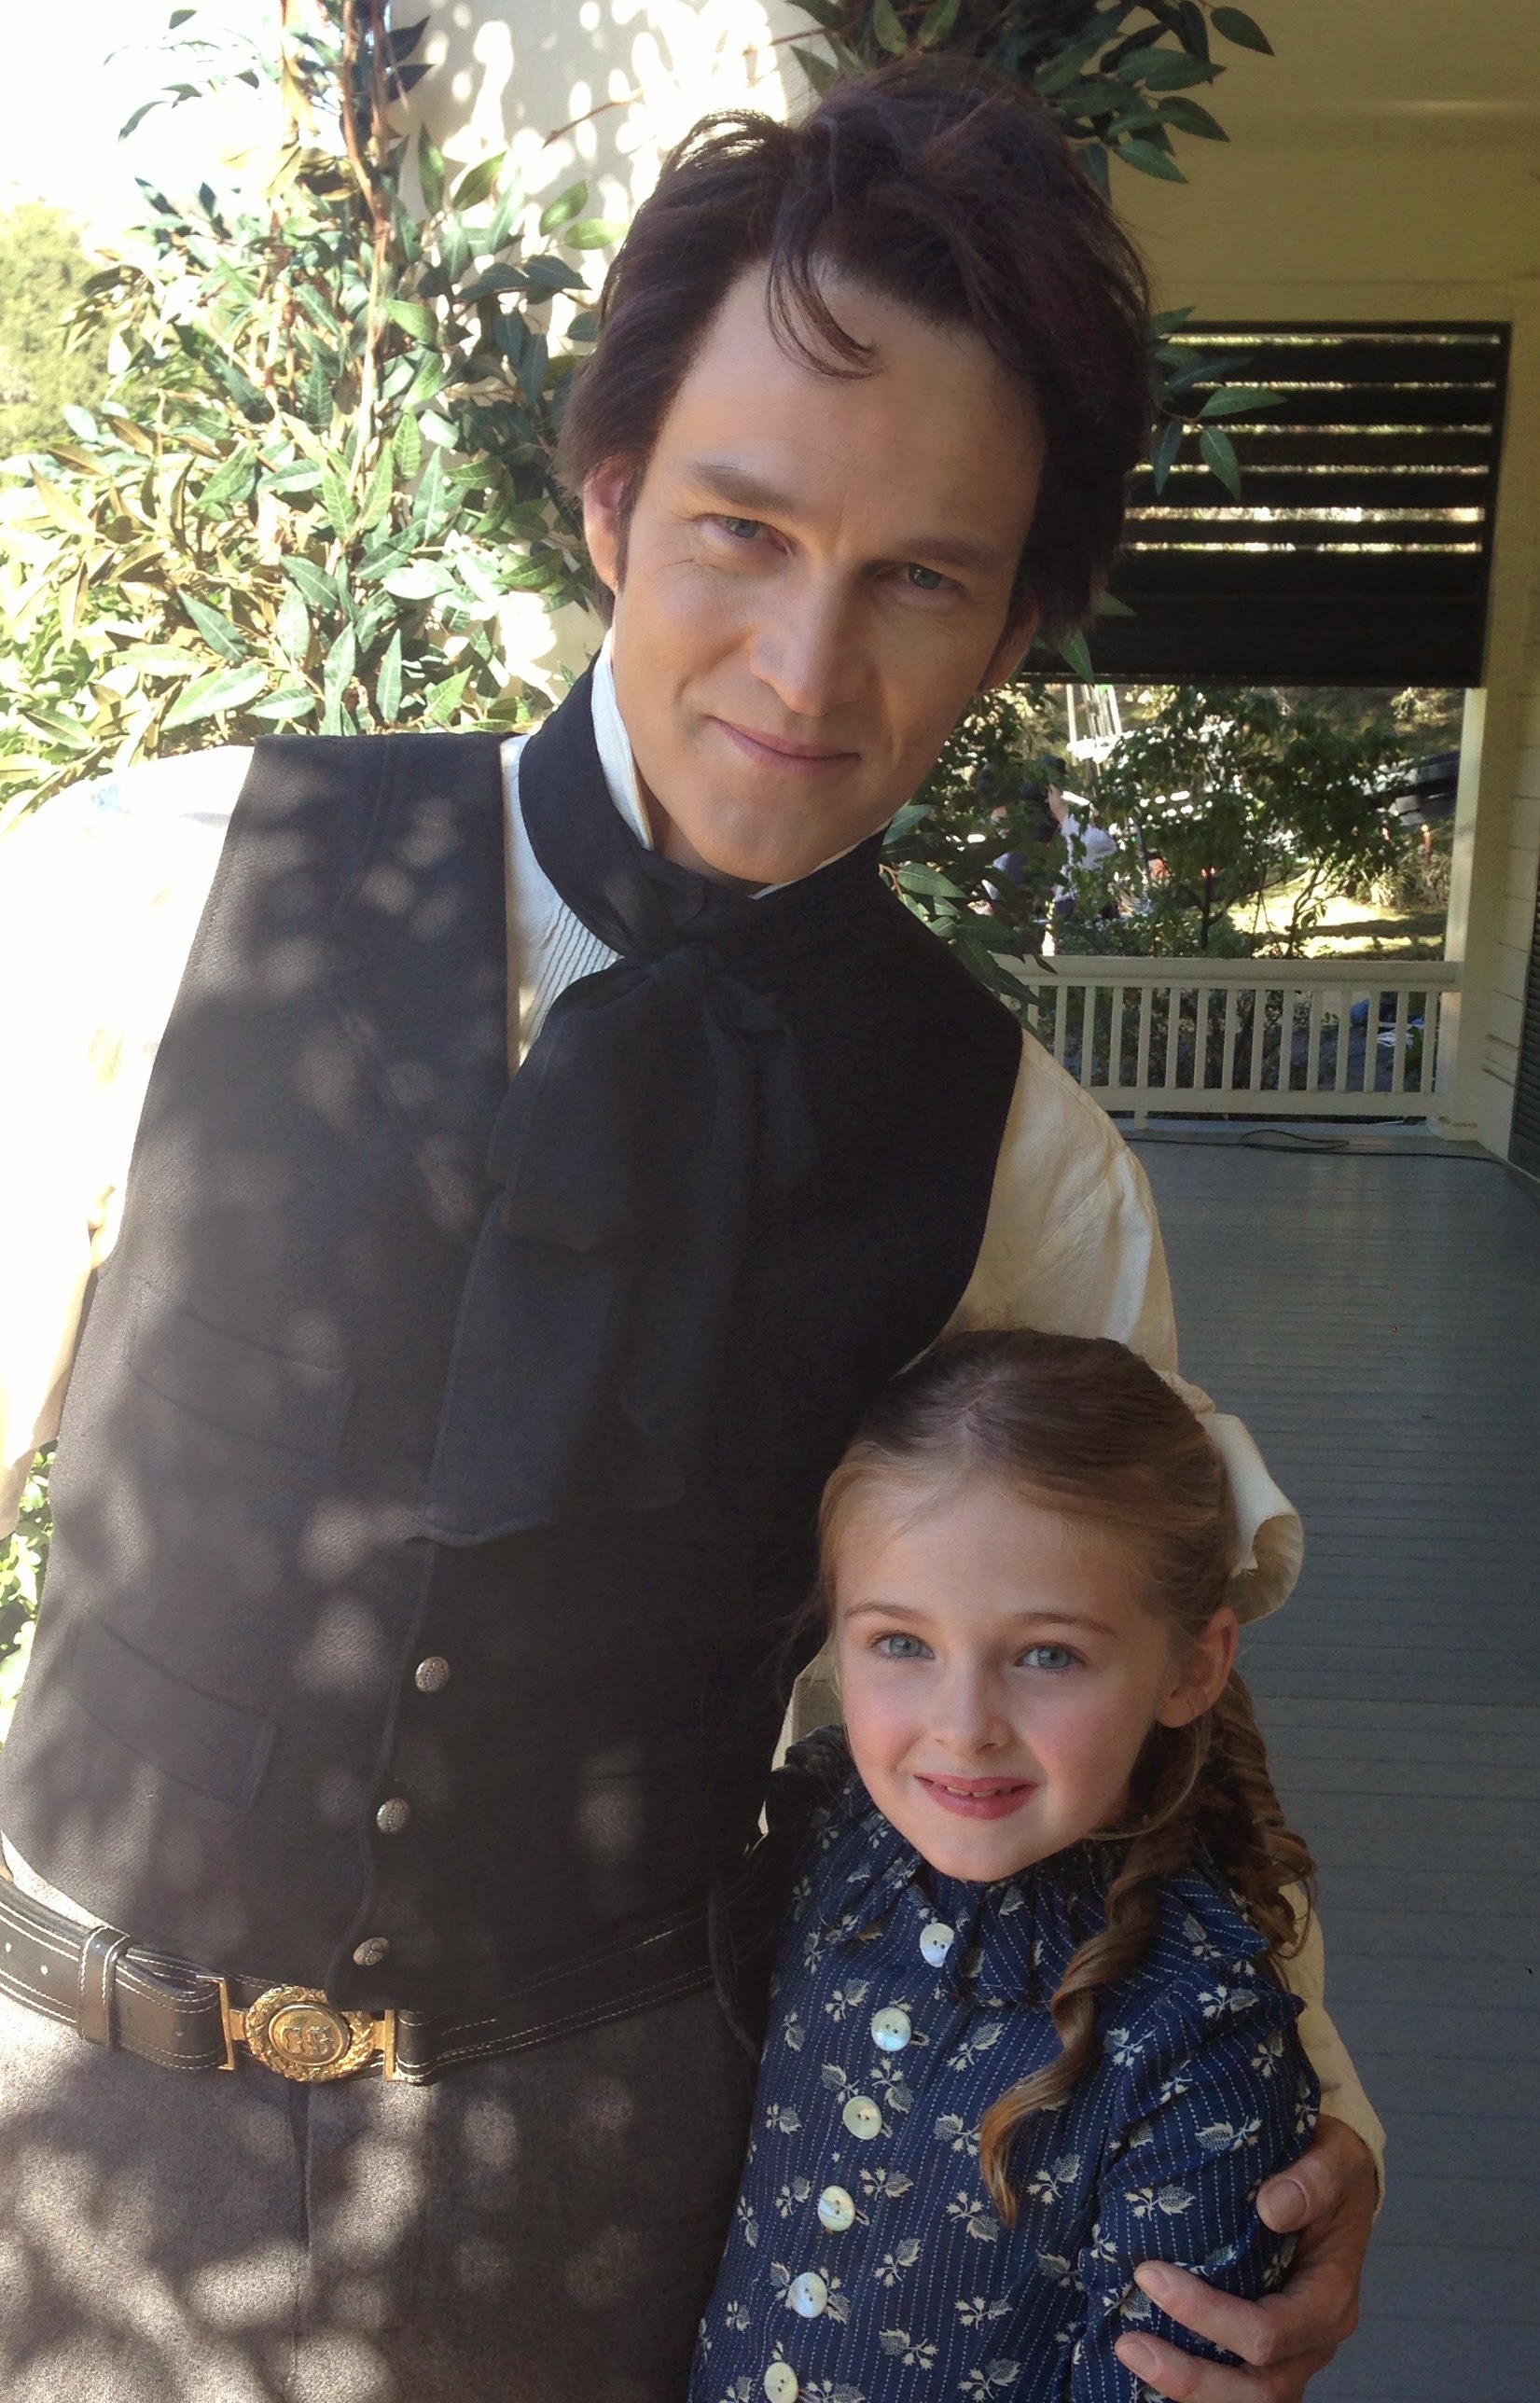 Isabella and Stephen Moyer on set of True Blood..